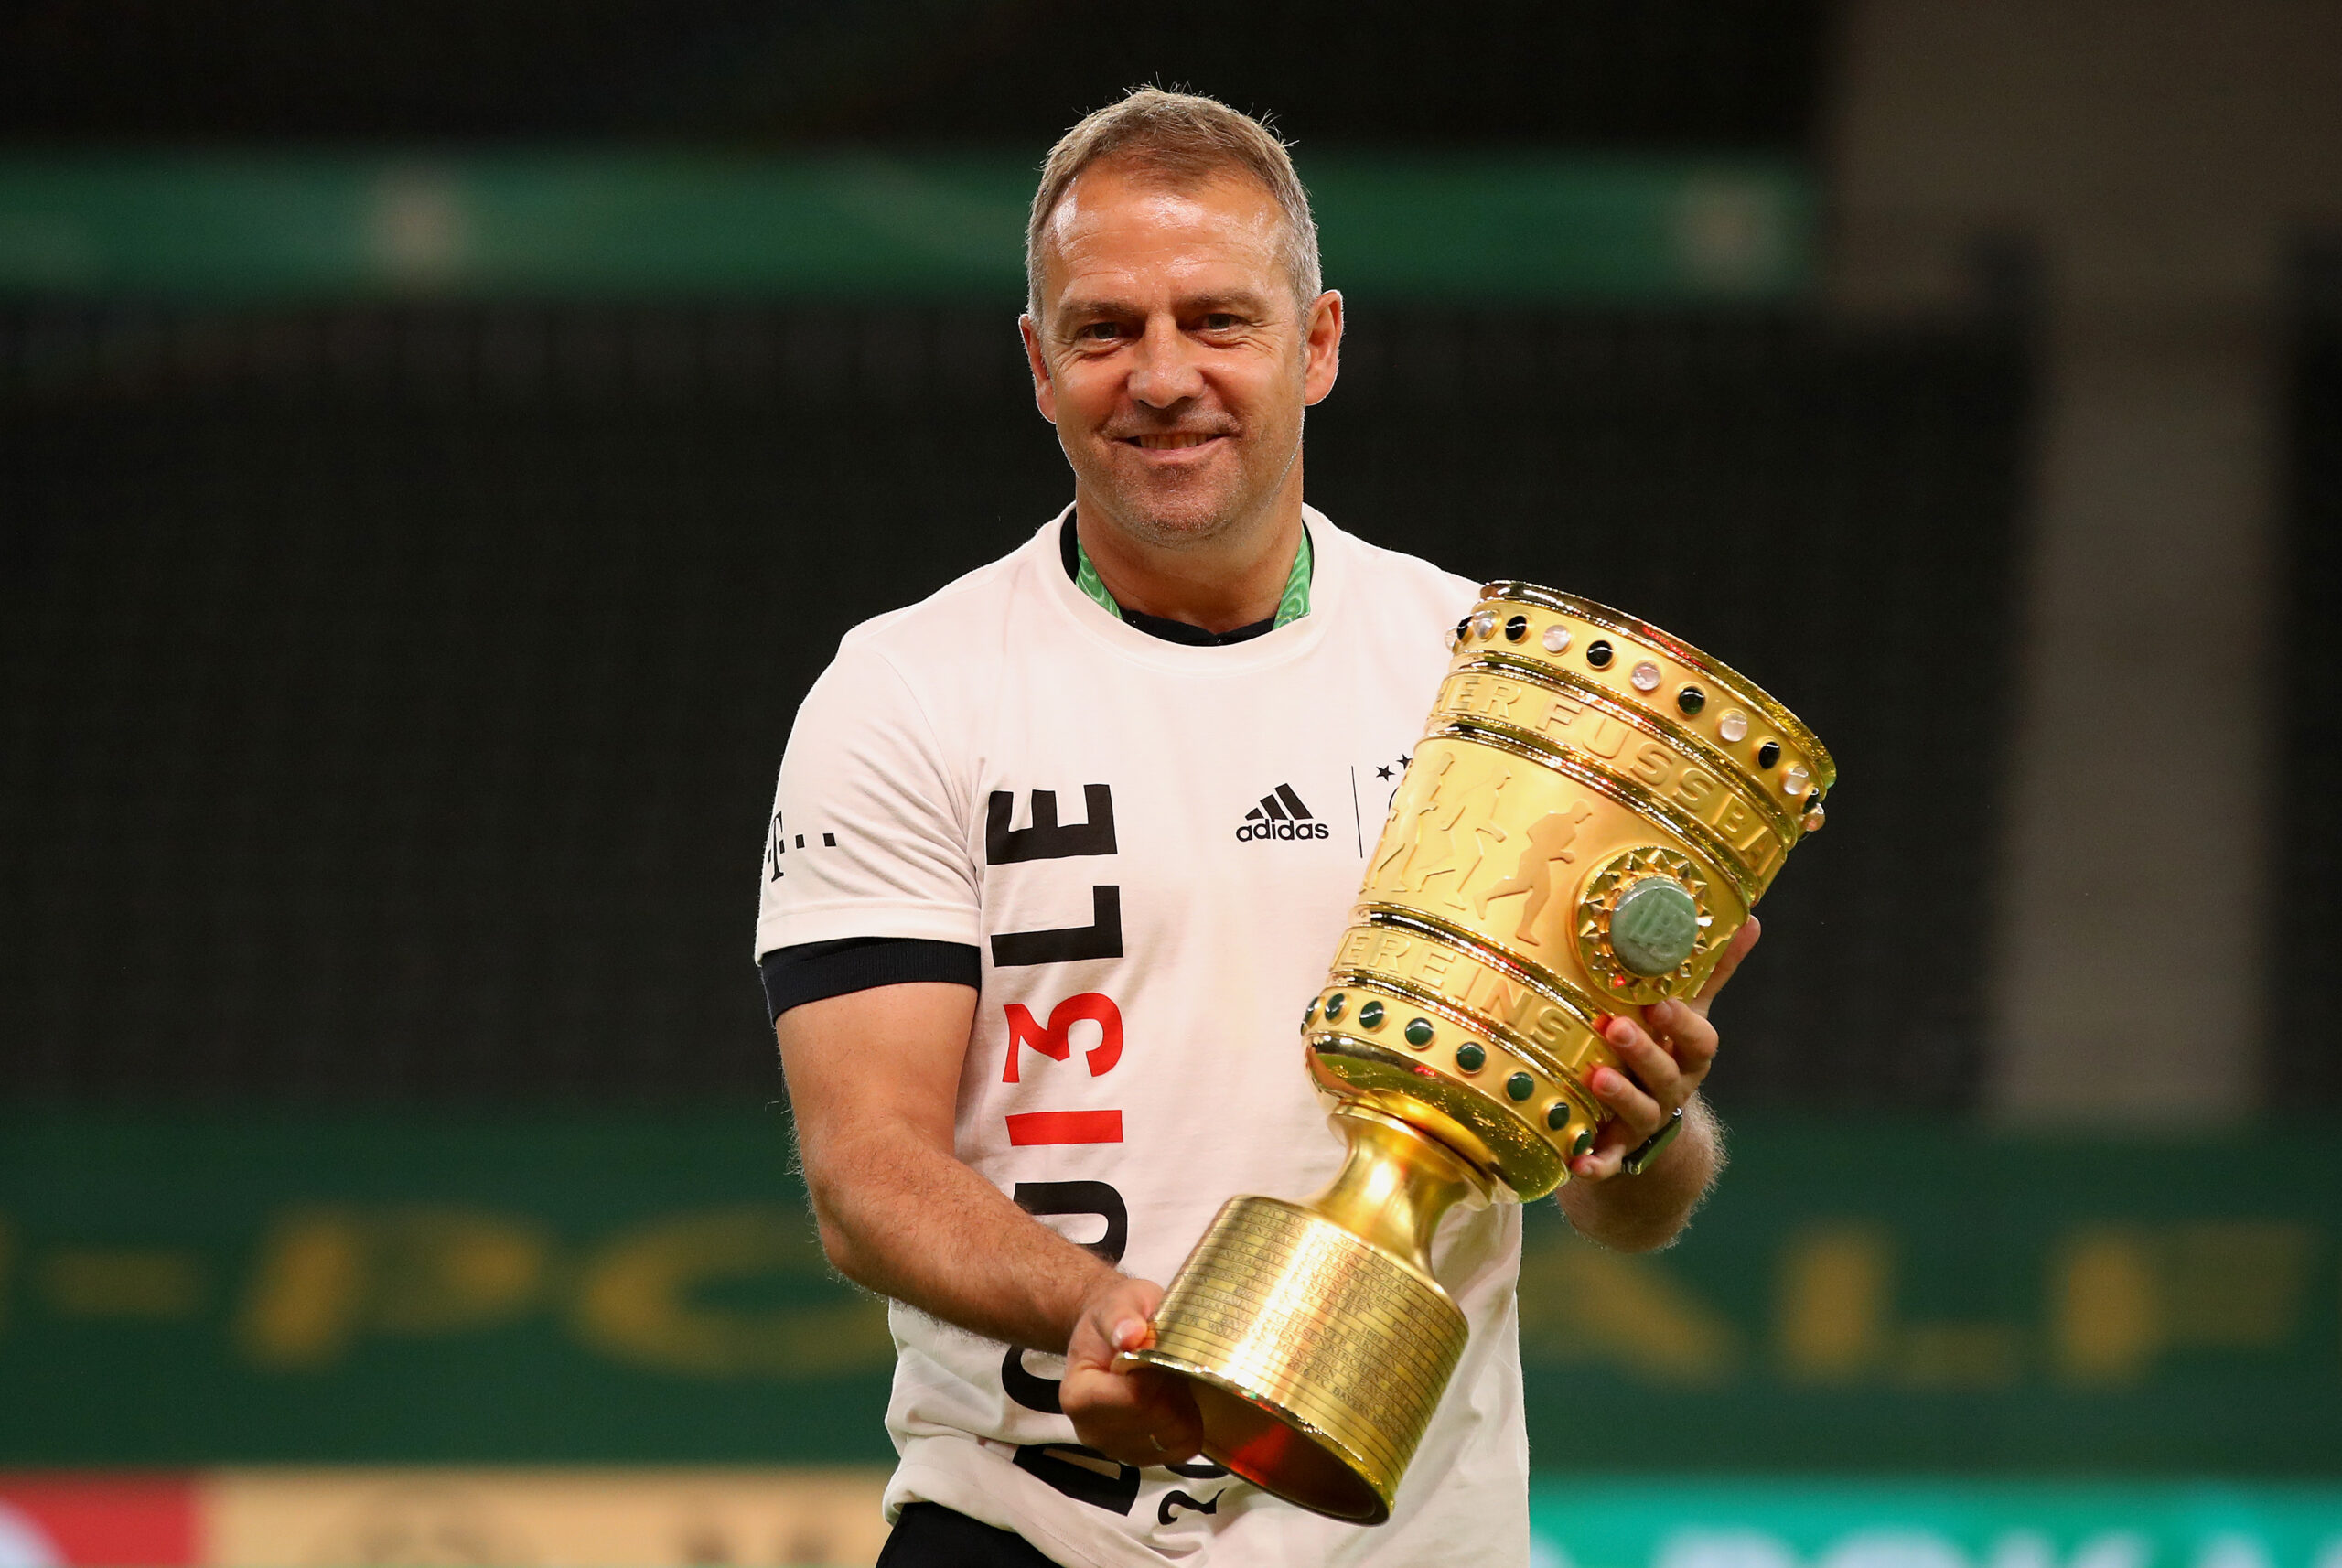 BERLIN, GERMANY - JULY 04: Head coach Hansi Flick of FC Bayern Muenchen poses with the trophy in celebration after the DFB Cup final match between Bayer 04 Leverkusen and FC Bayern Muenchen at Olympiastadion on July 04, 2020 in Berlin, Germany.